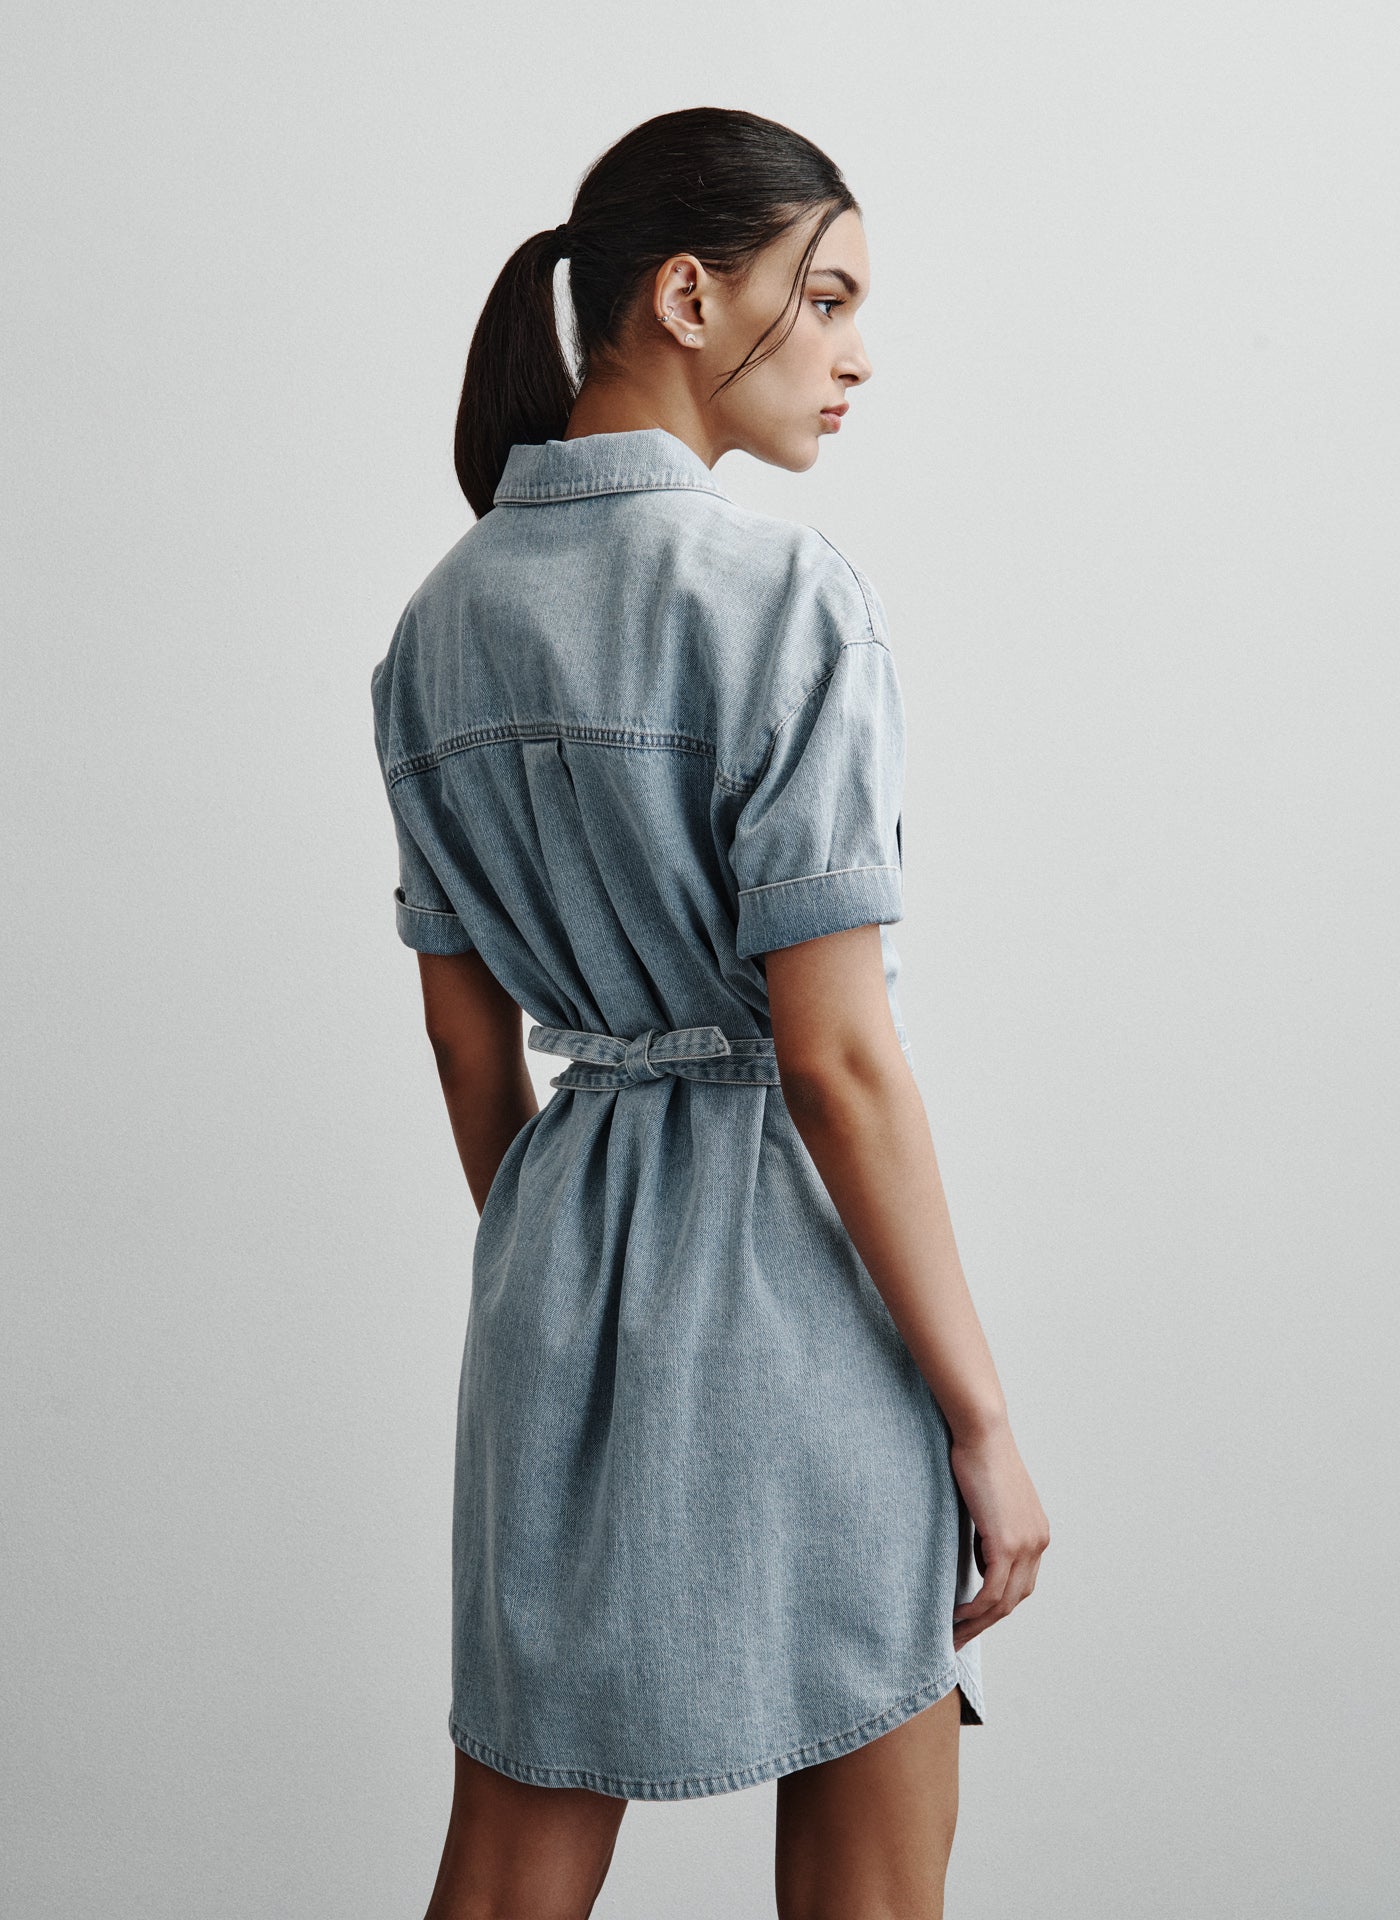 Denim Utility Dress - The Red Thread Boutique